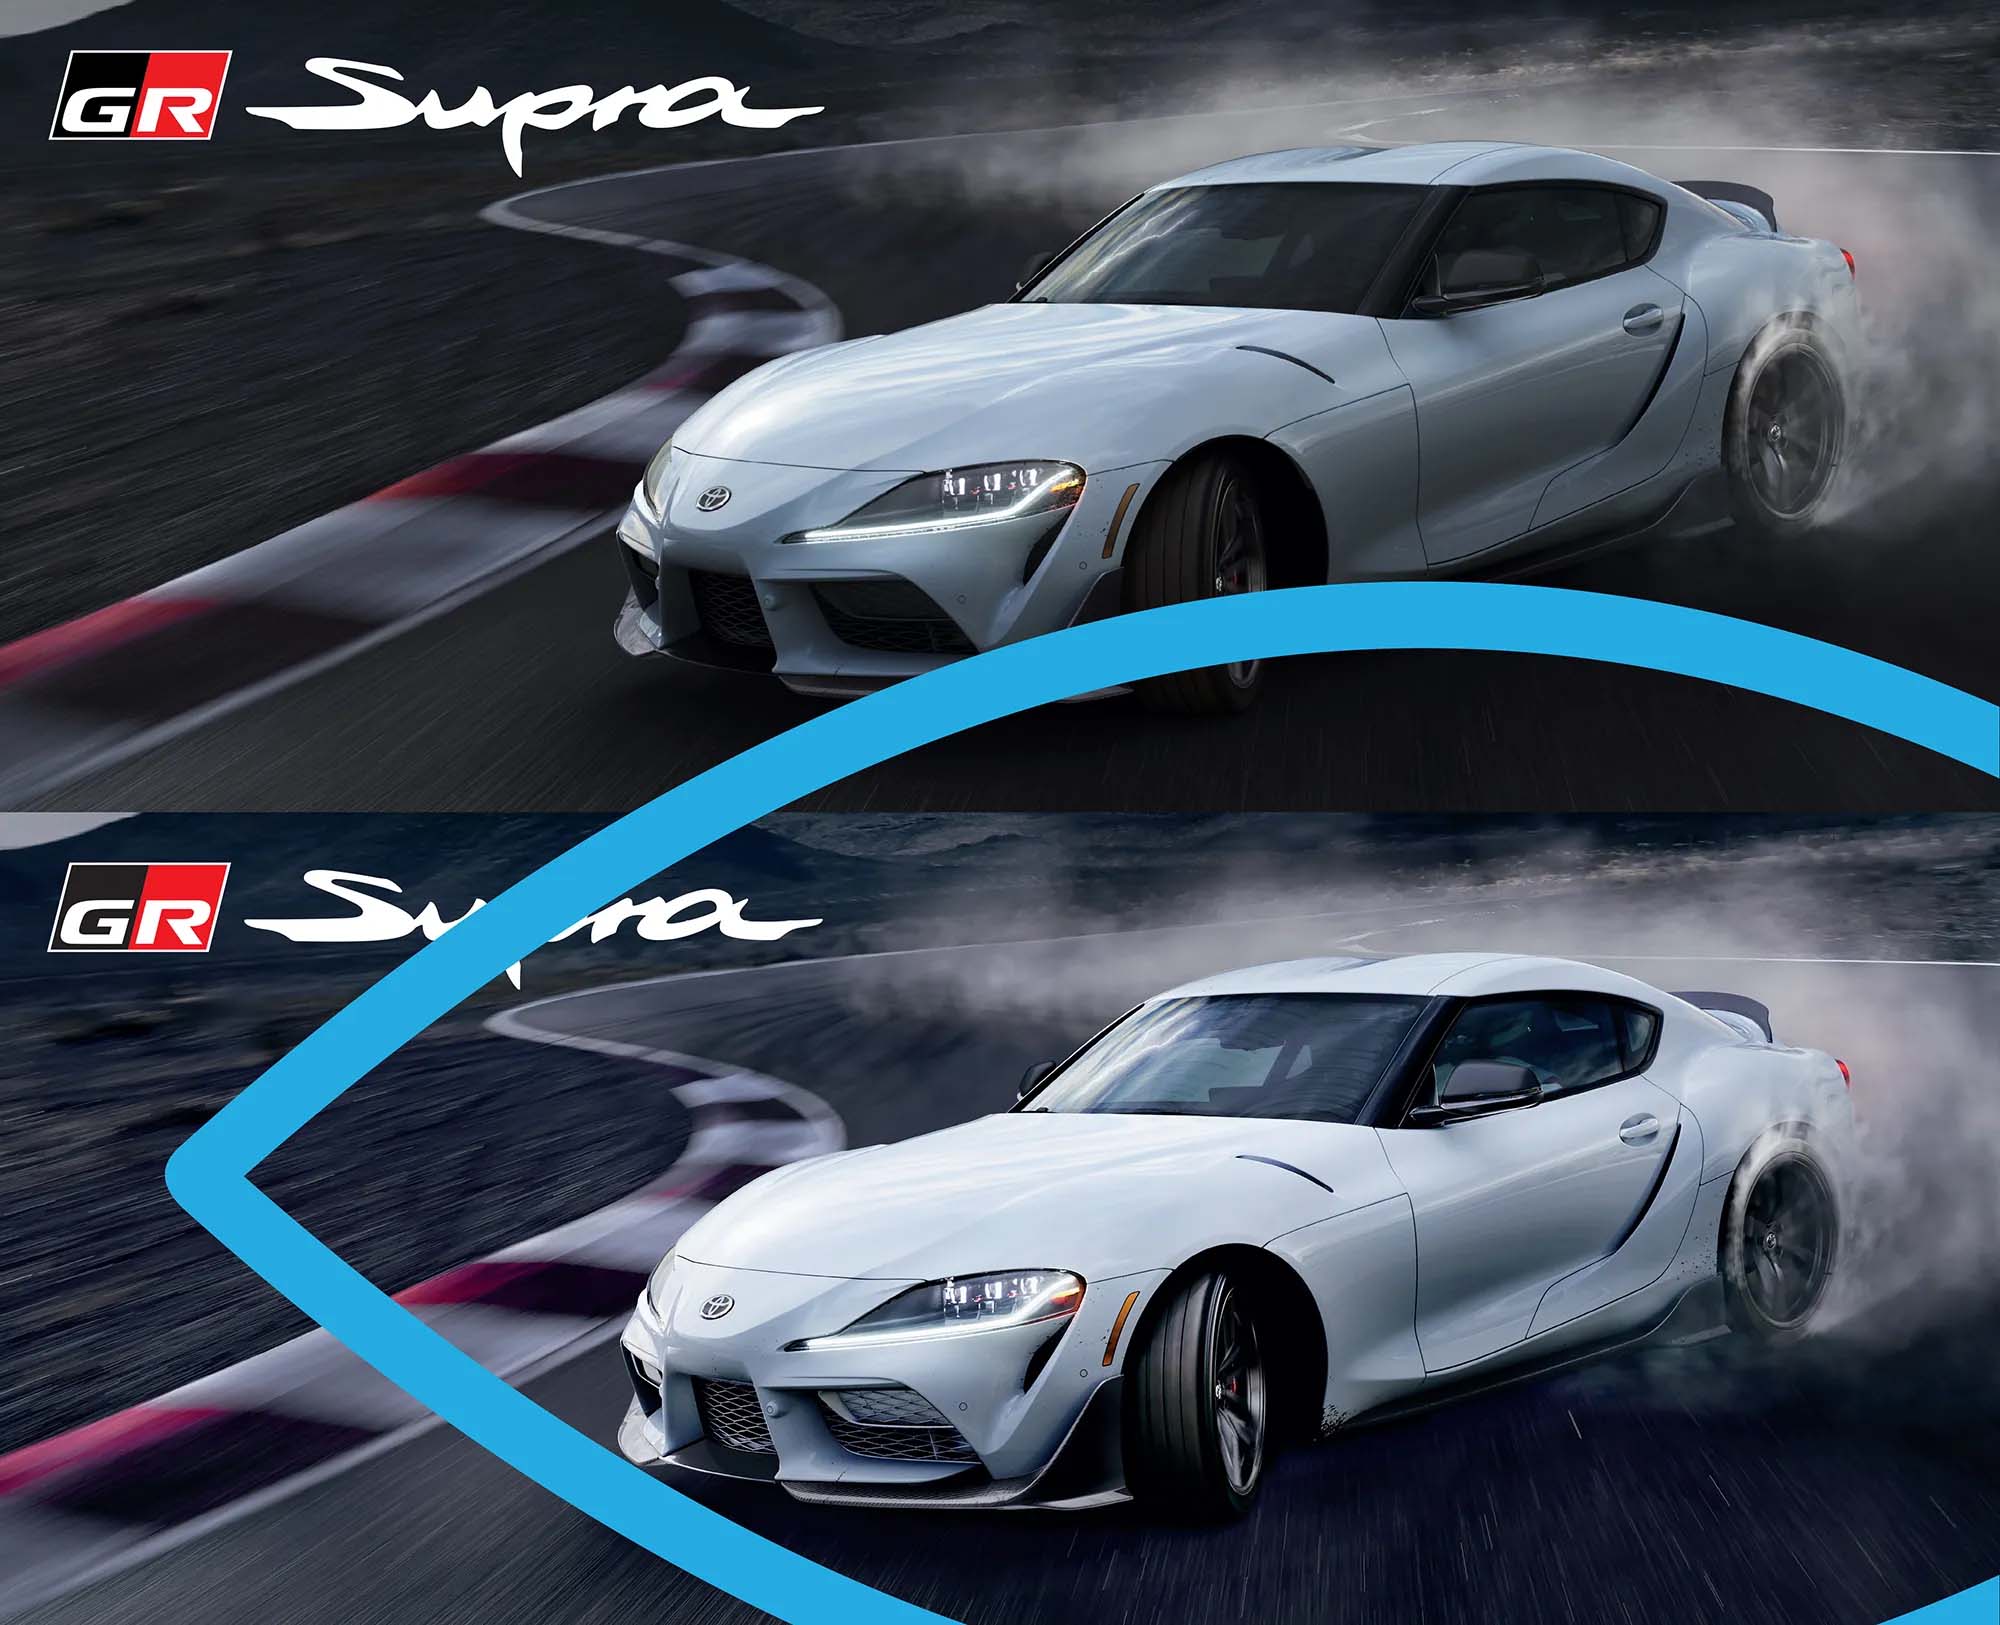 The original image sits atop the premedia enhanced image of the Toyota Supra on a race track.